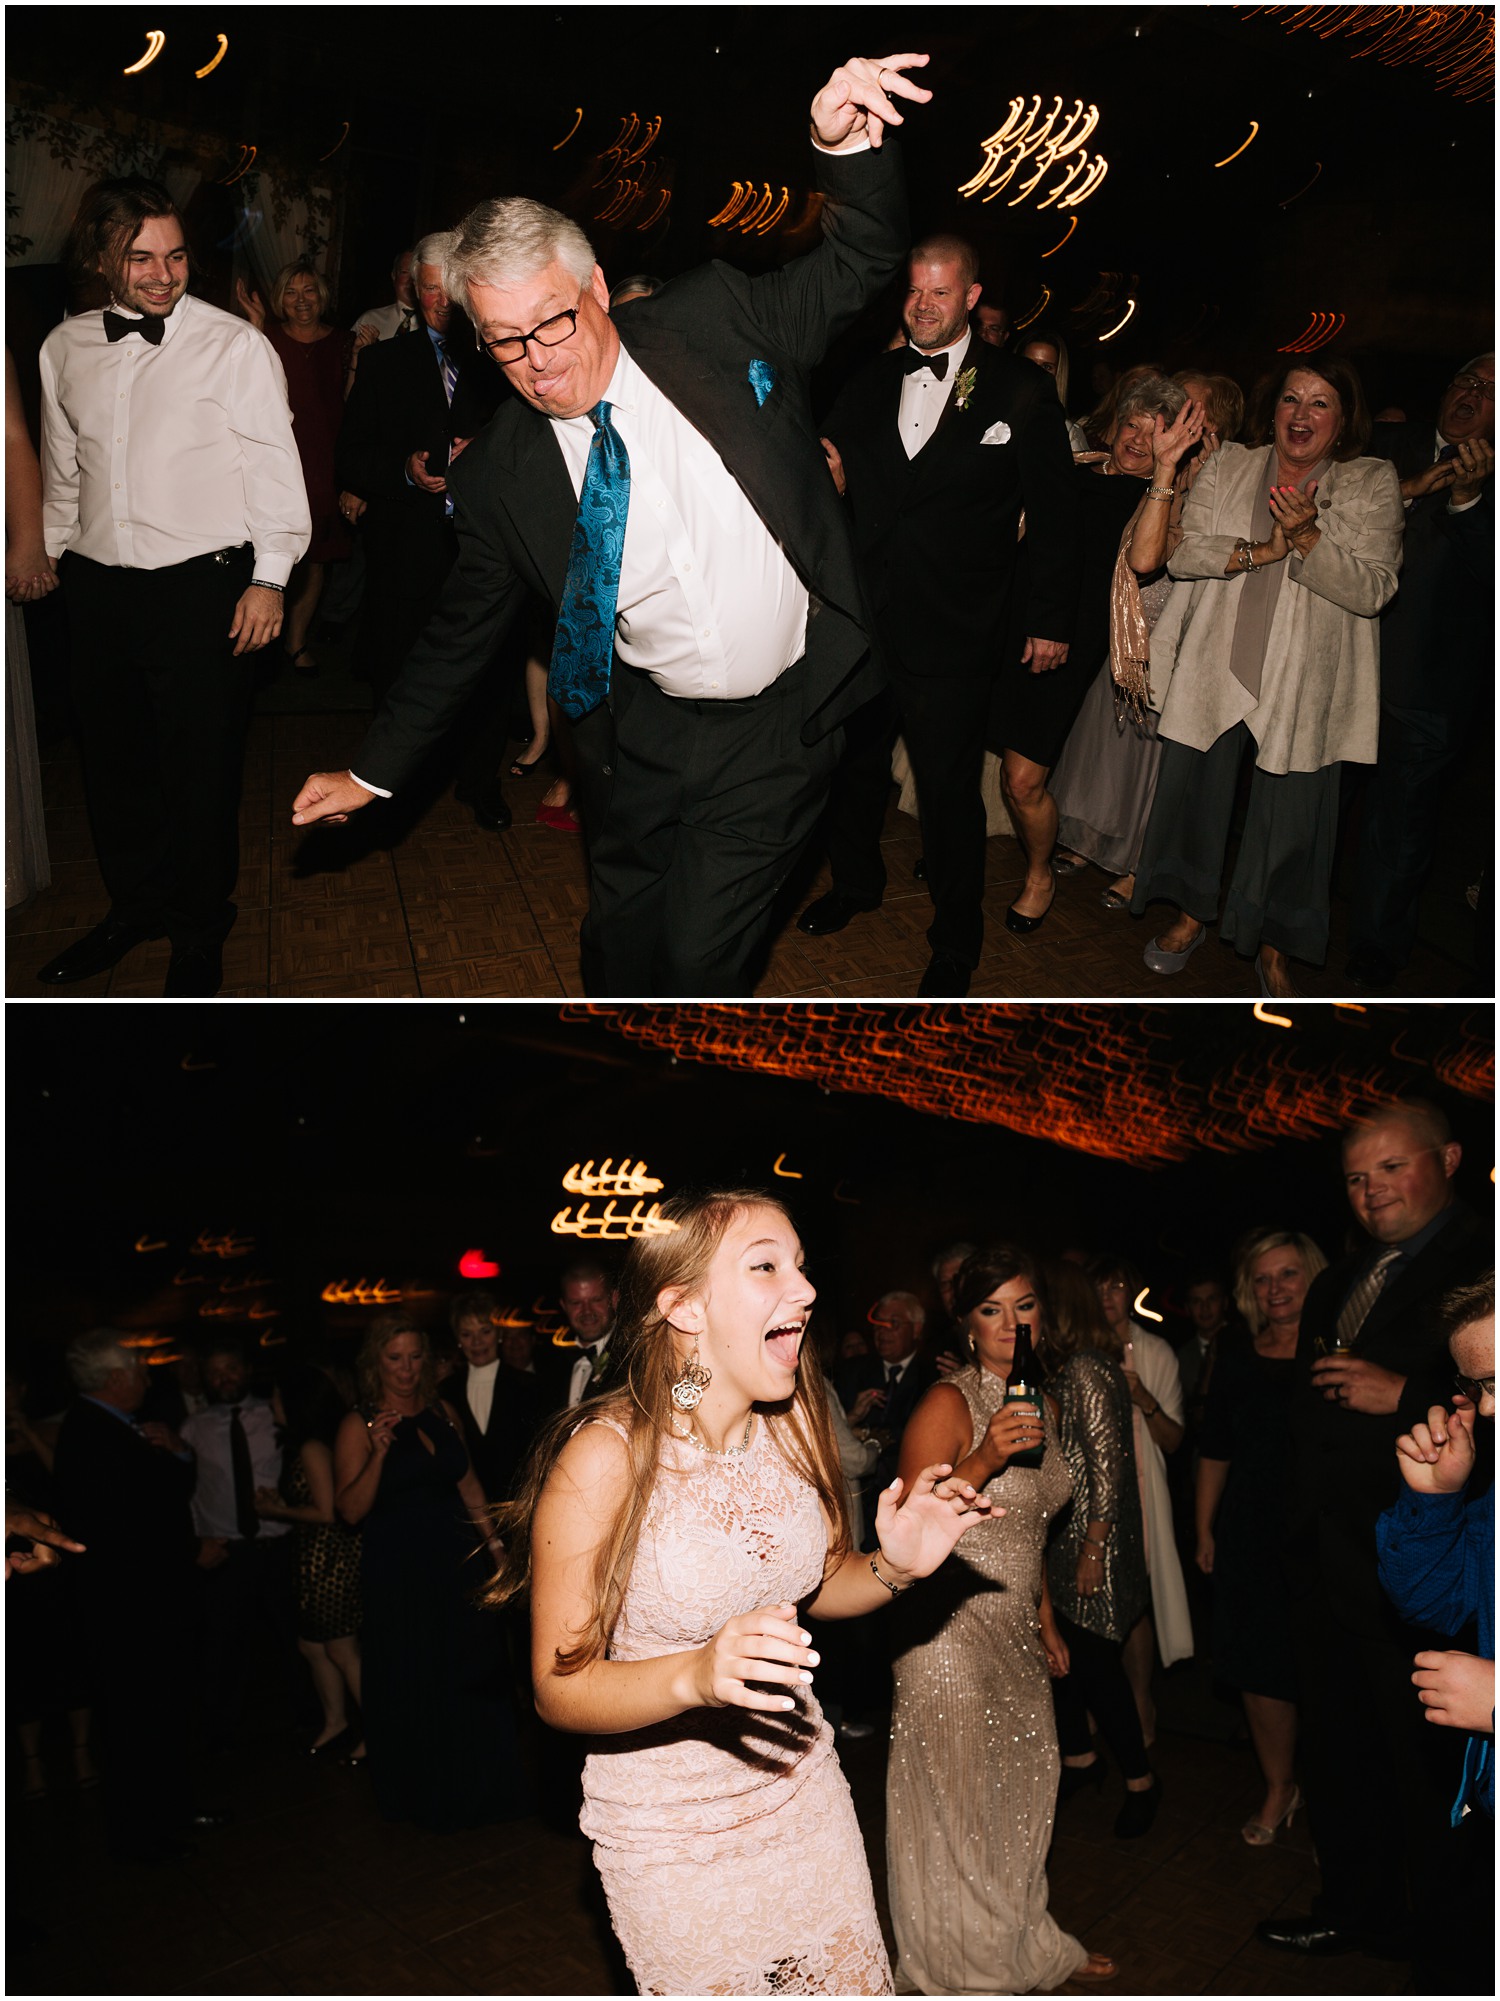 guests dance during wedding reception at Old Edwards Inn